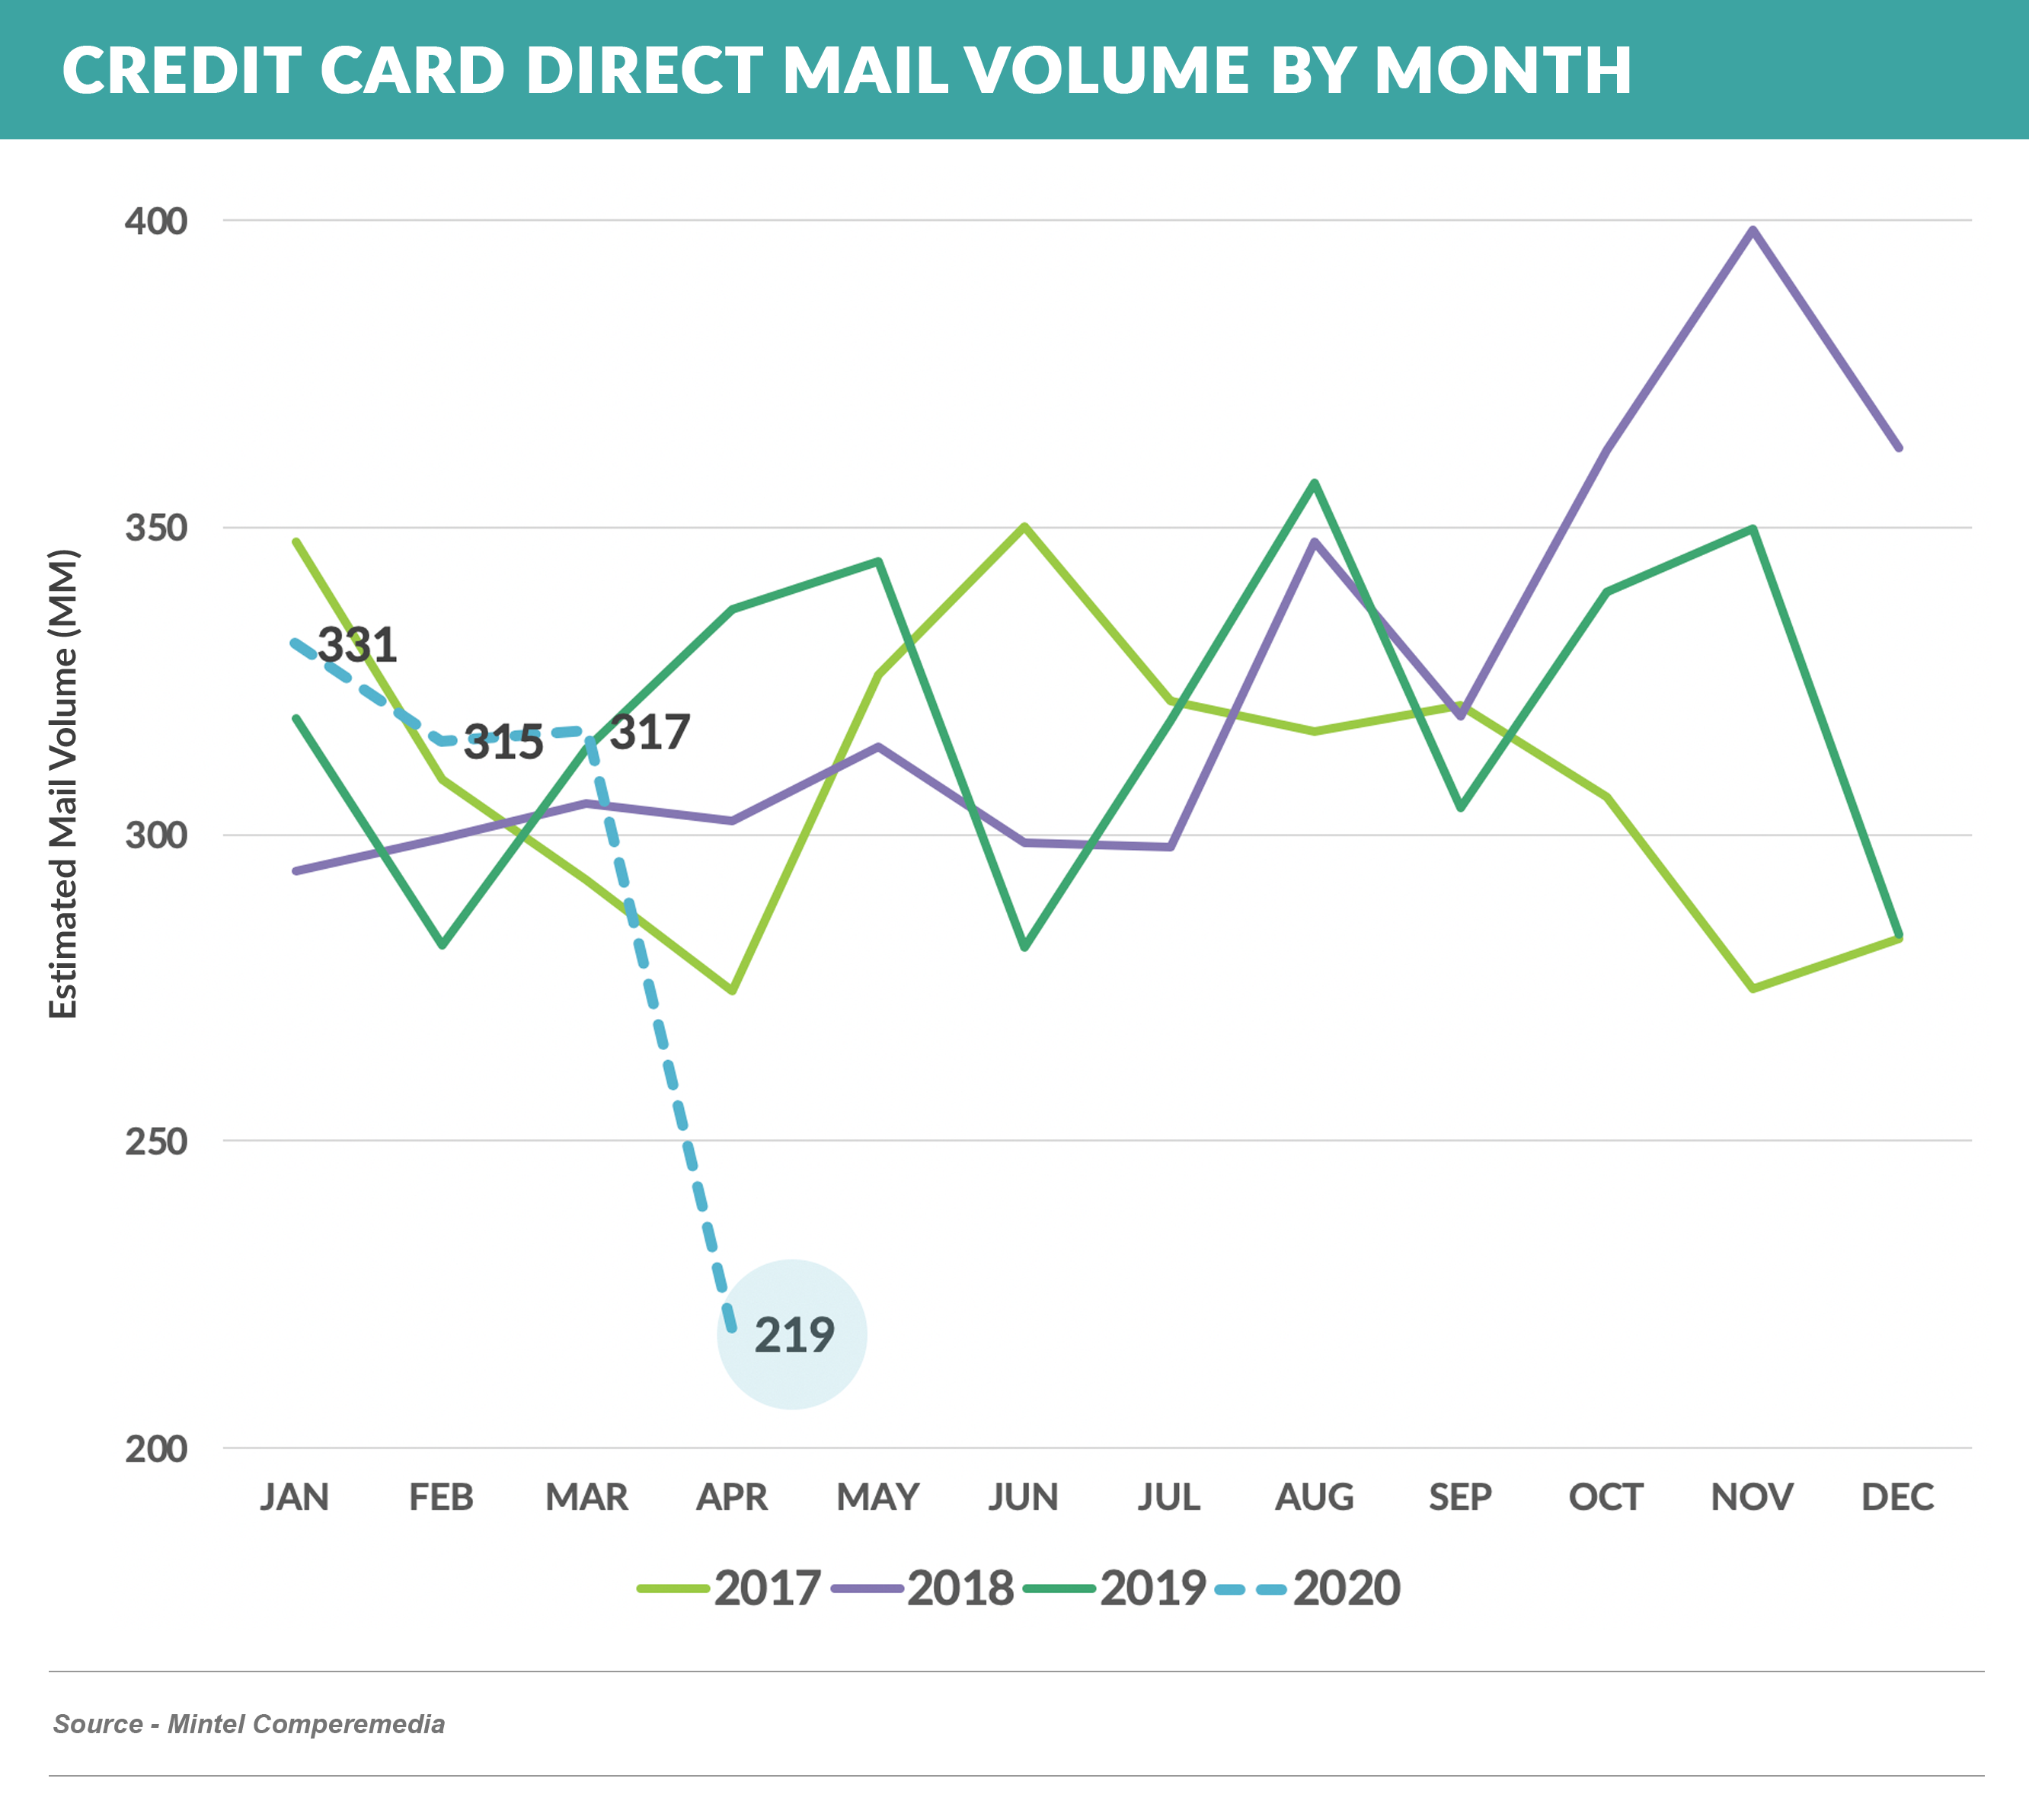 Credit-Card-DM-Volume-by-Month